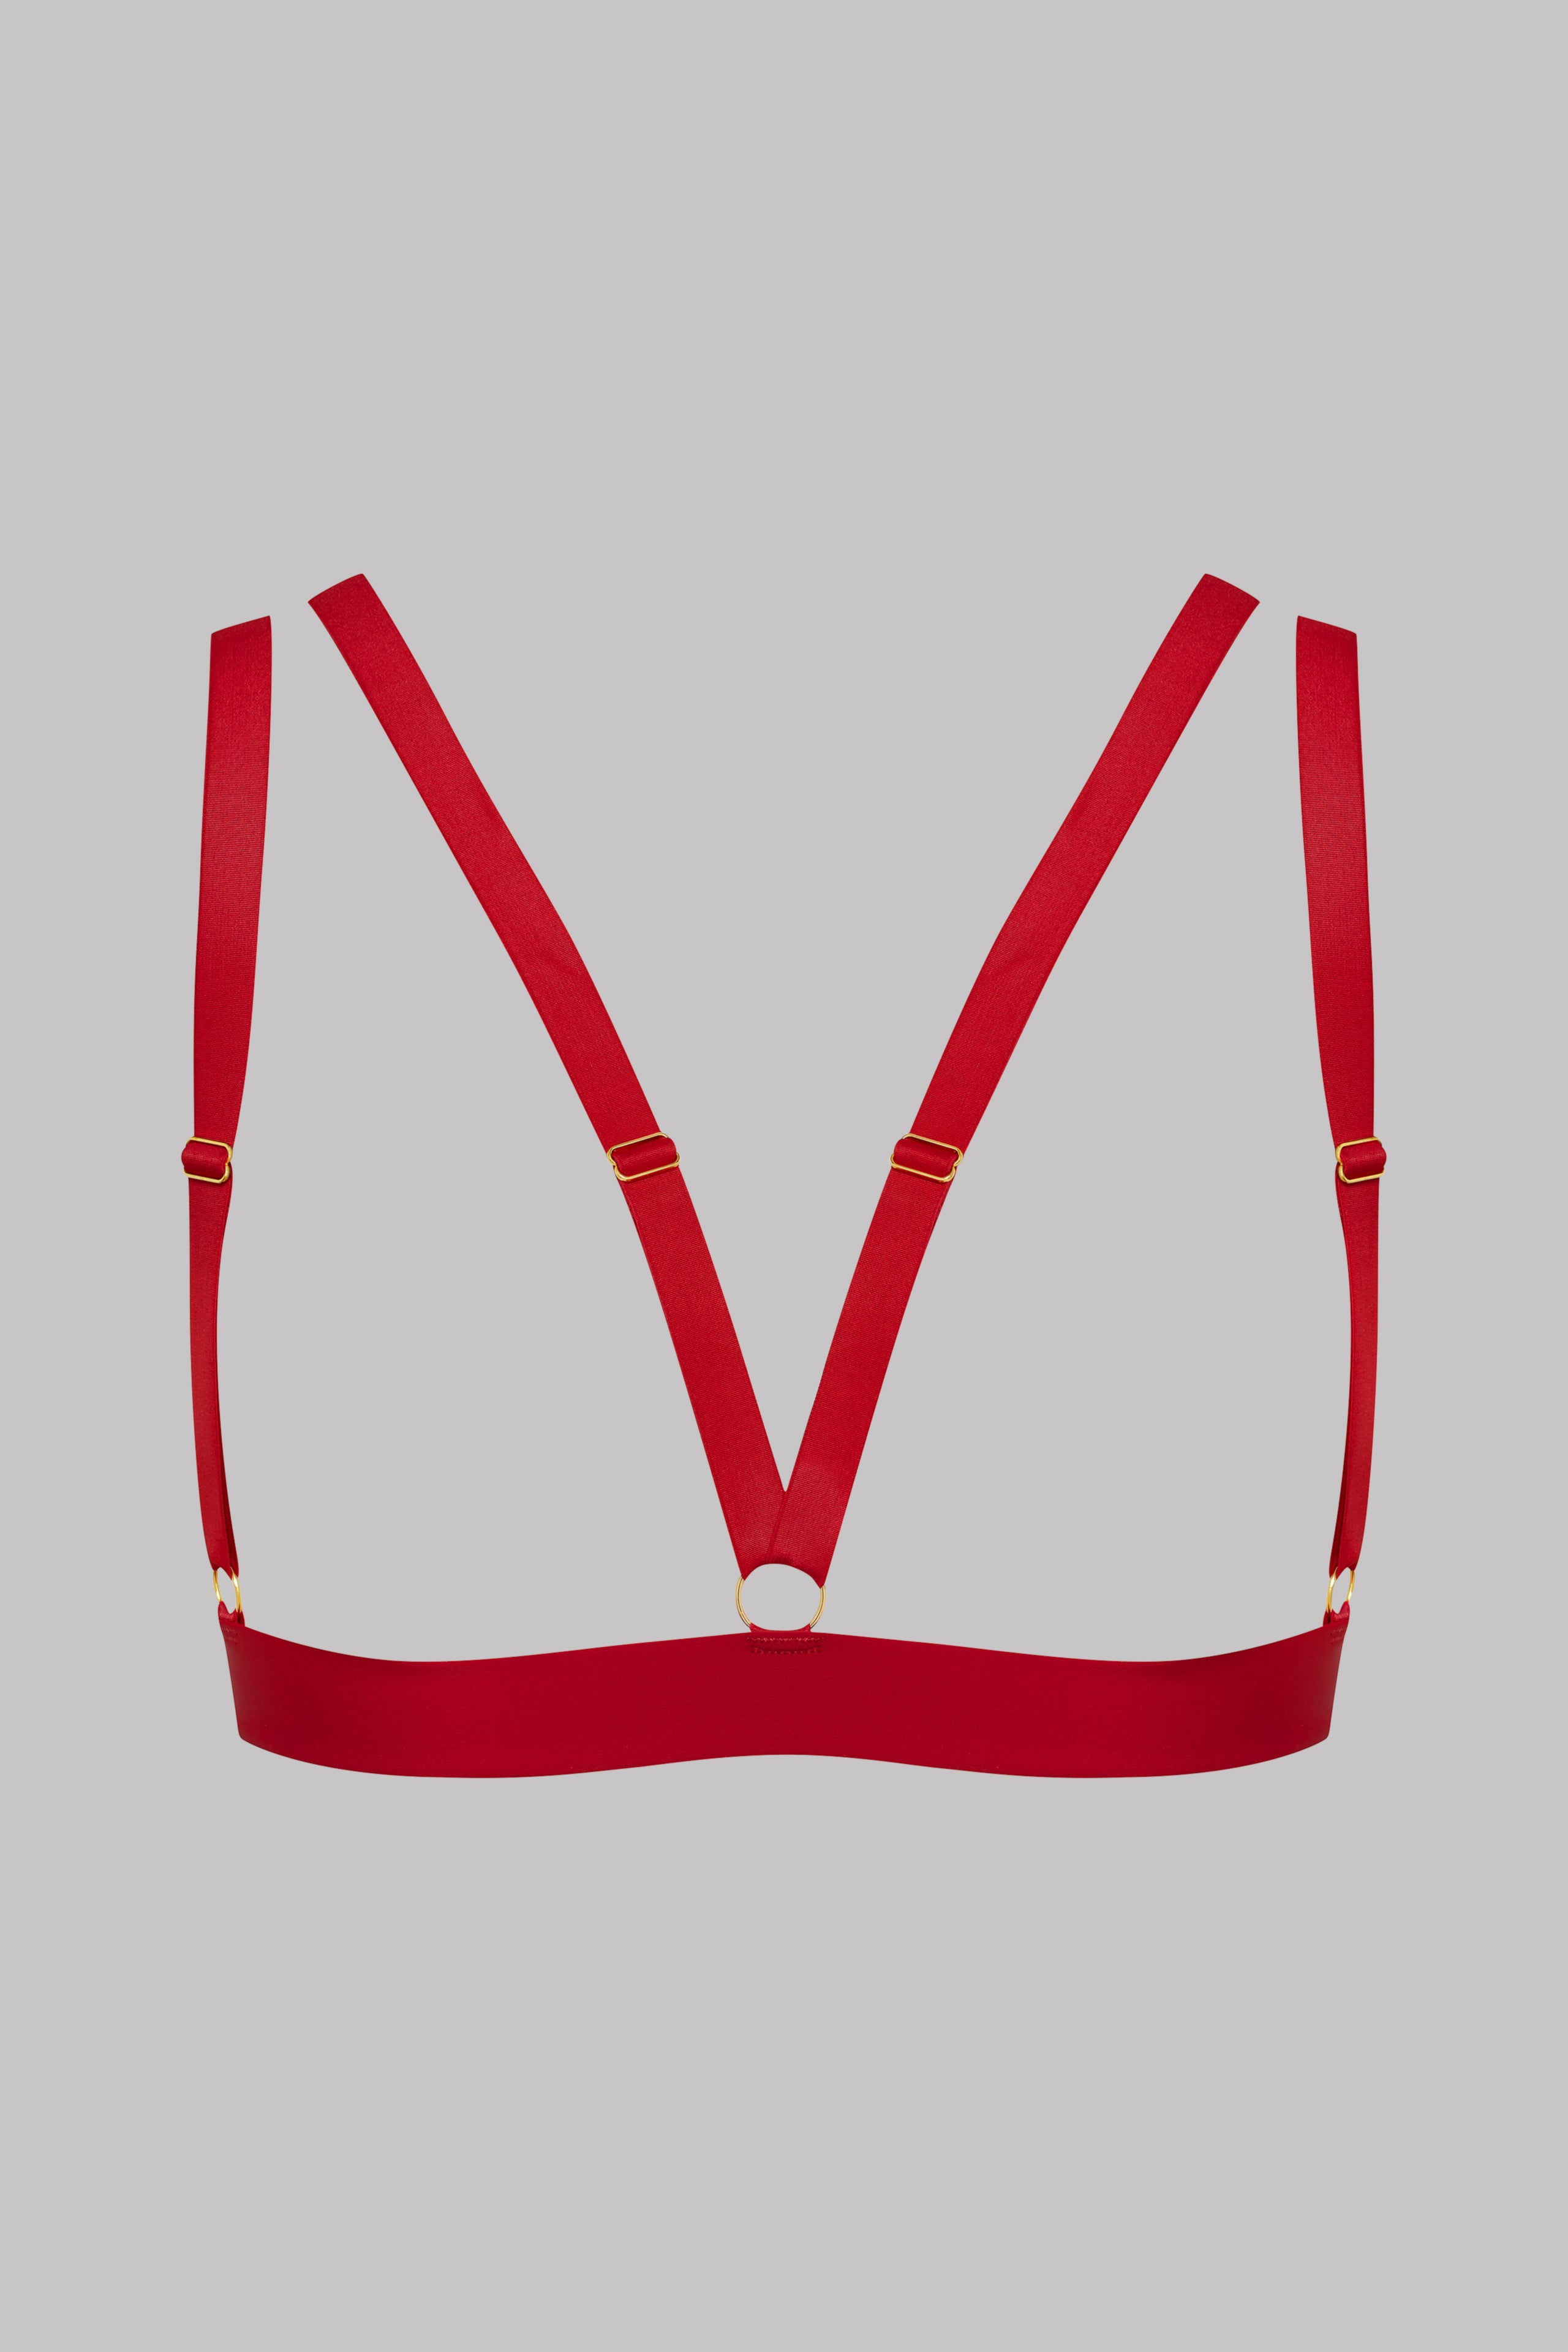 Soutien-gorge triangle ouvert - Tapage Nocturne